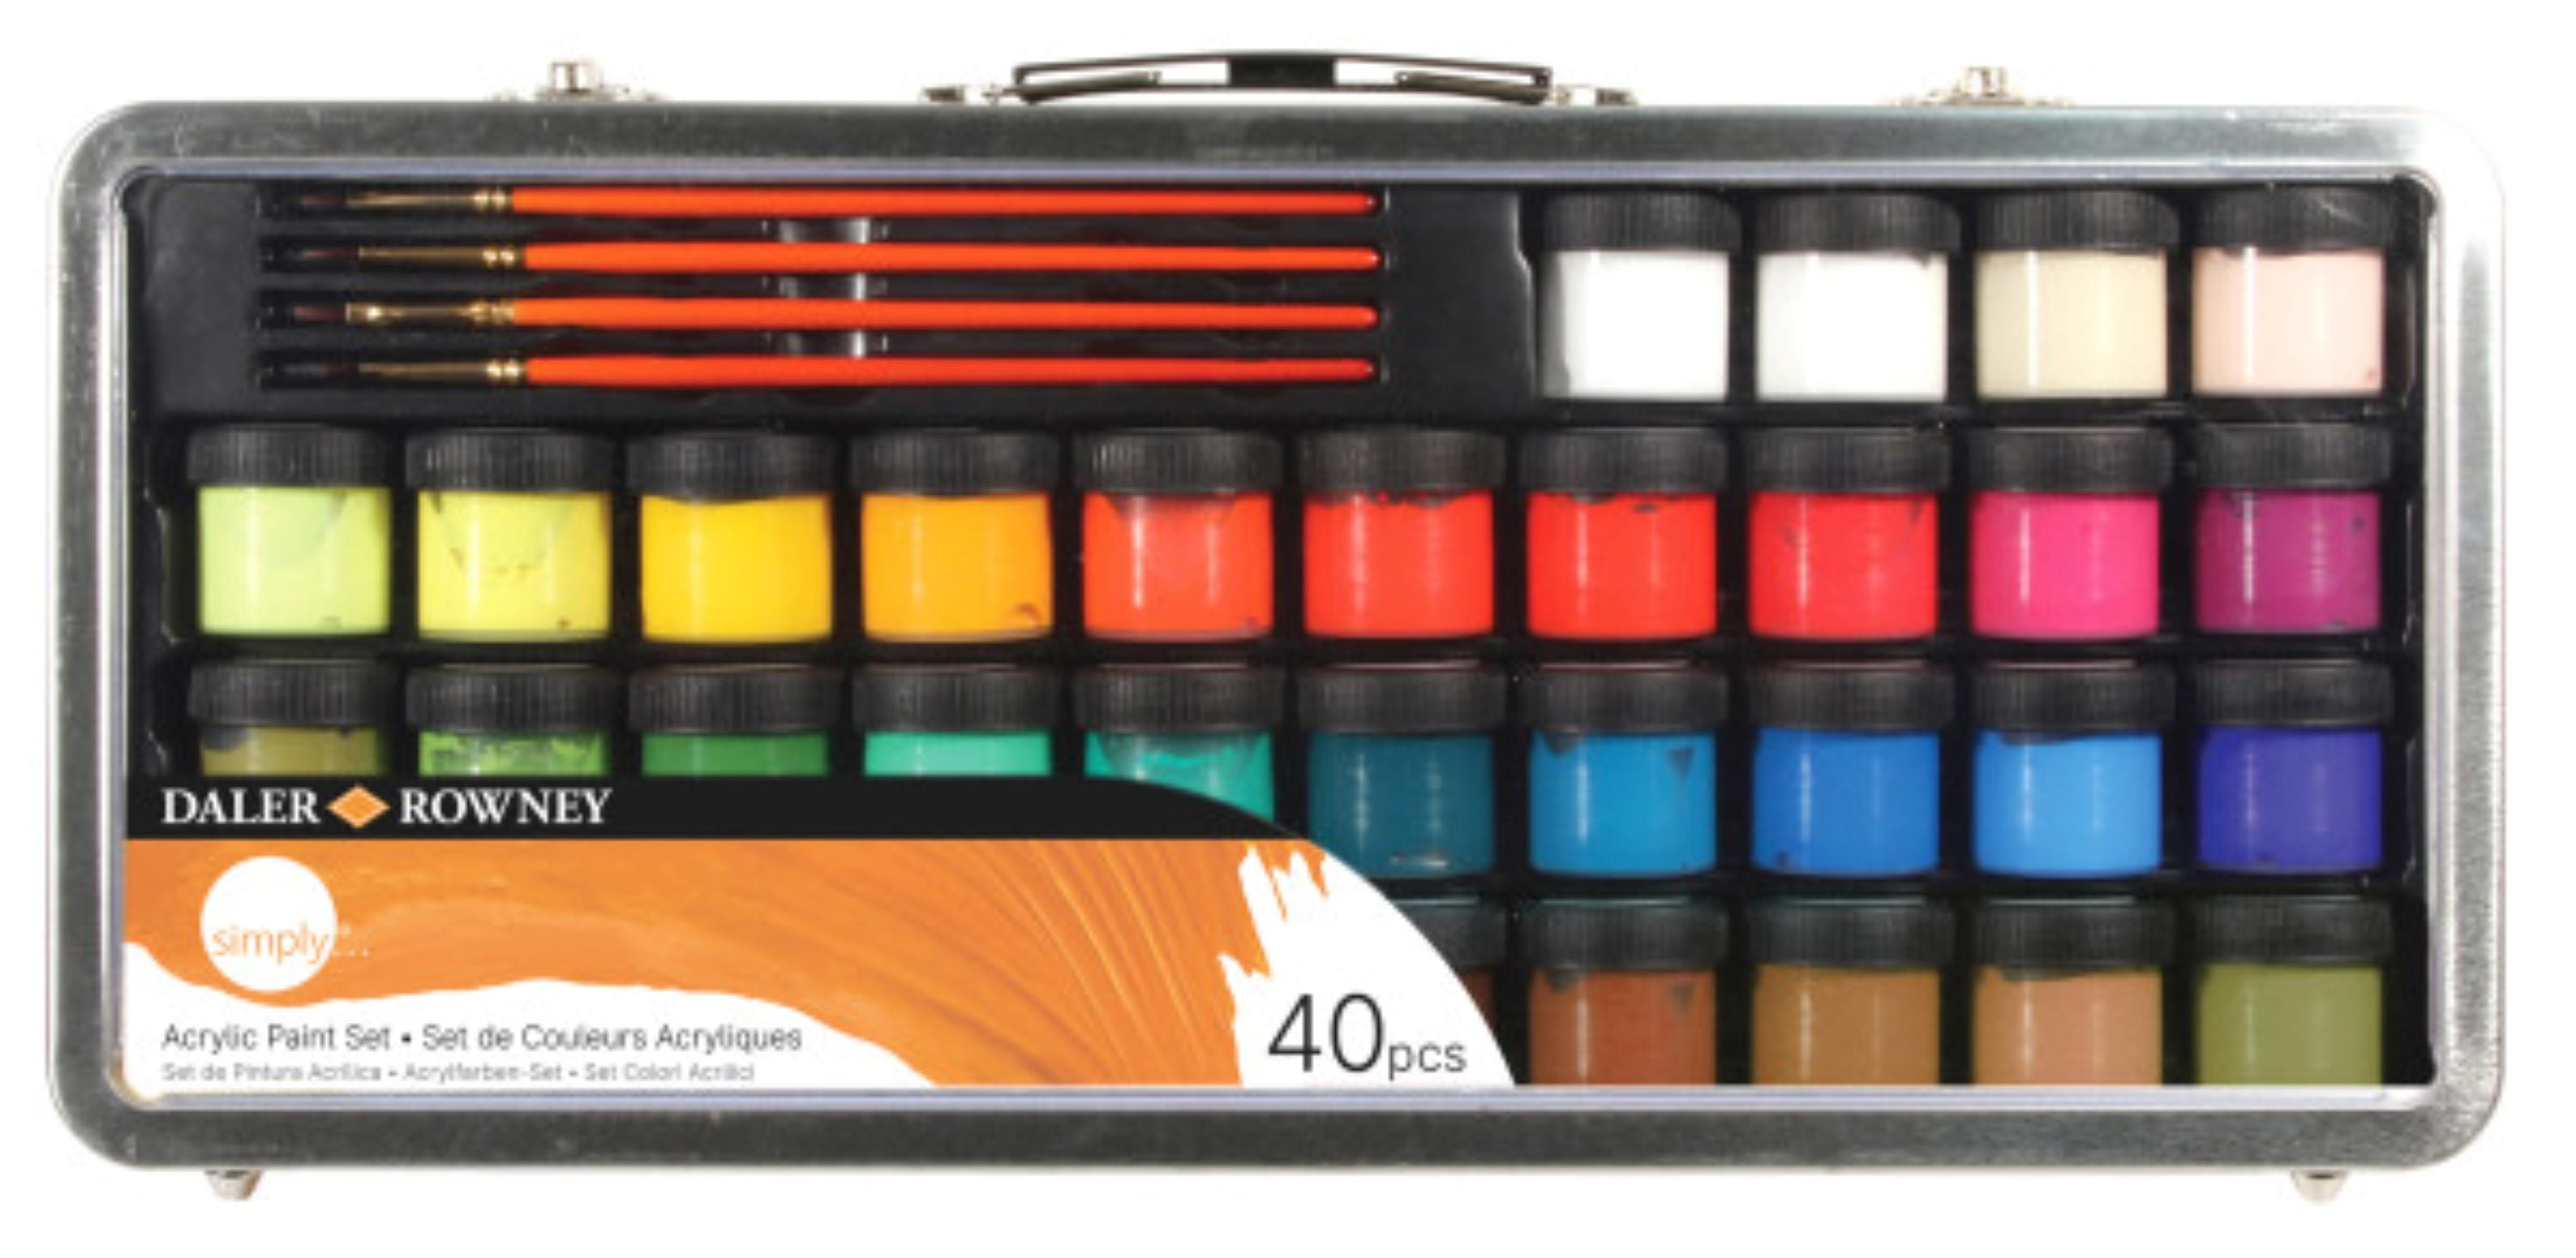 Daler-Rowney Simply Acrylic Paint Set, 34 Assorted Colors, 40 Pieces